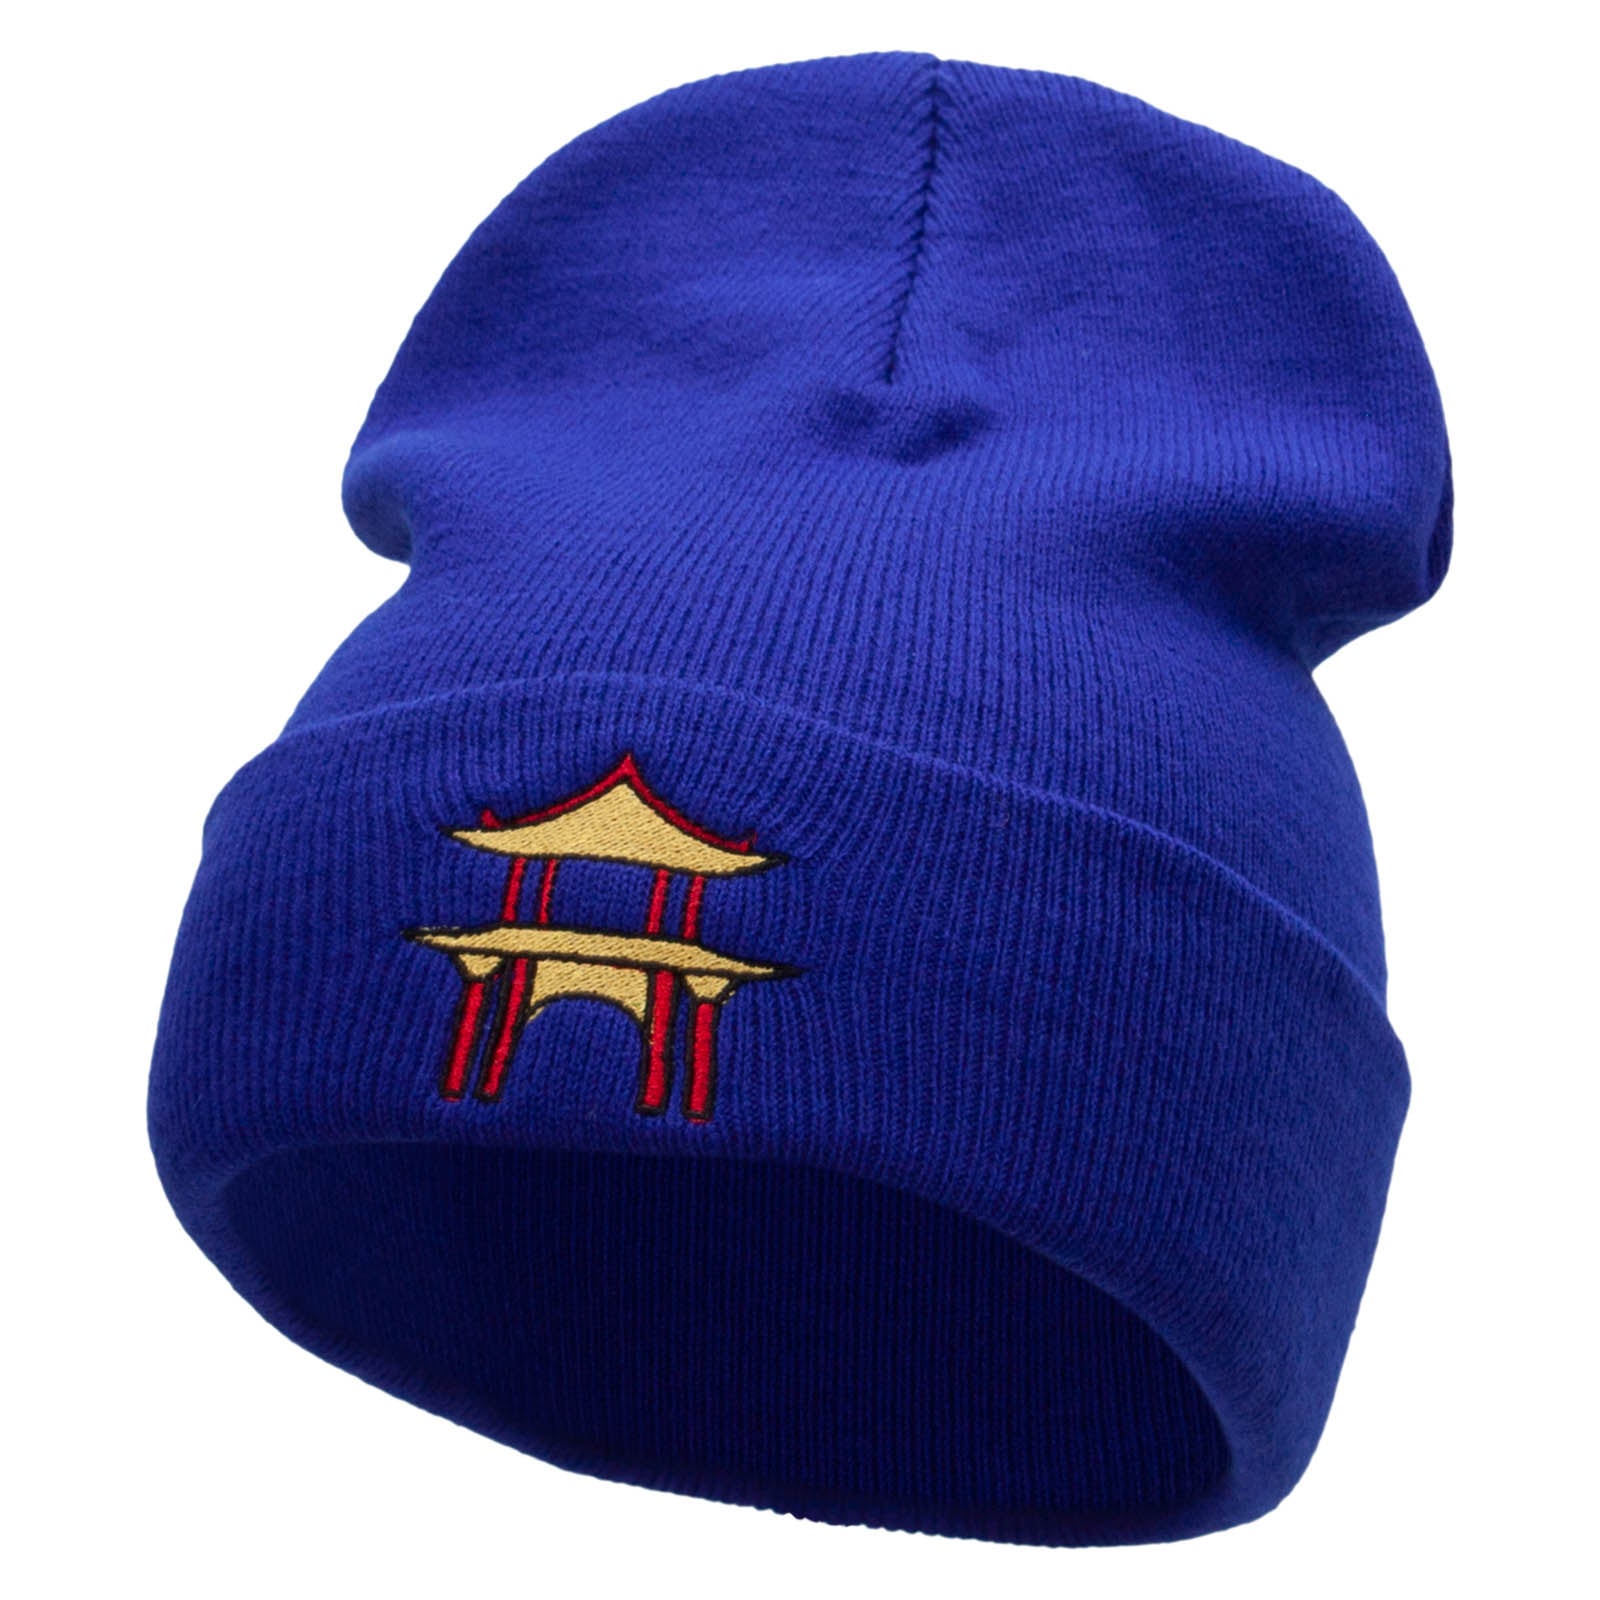 Karate Dojo Embroidered 12 Inch Long Knitted Beanie - Royal OSFM